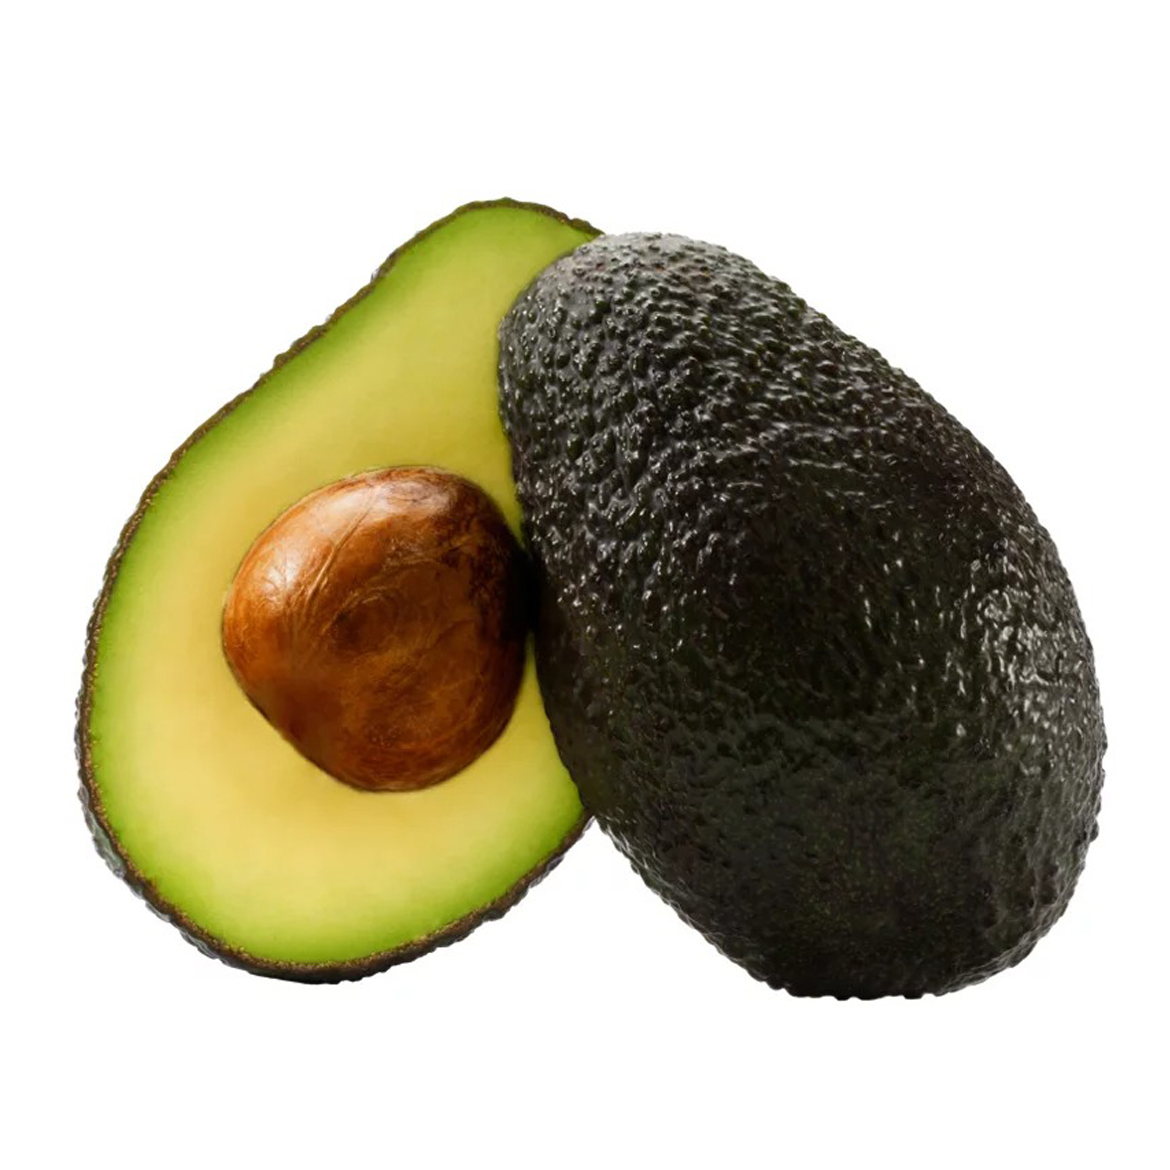 Fresh Hass Avocados, Each - image 1 of 3